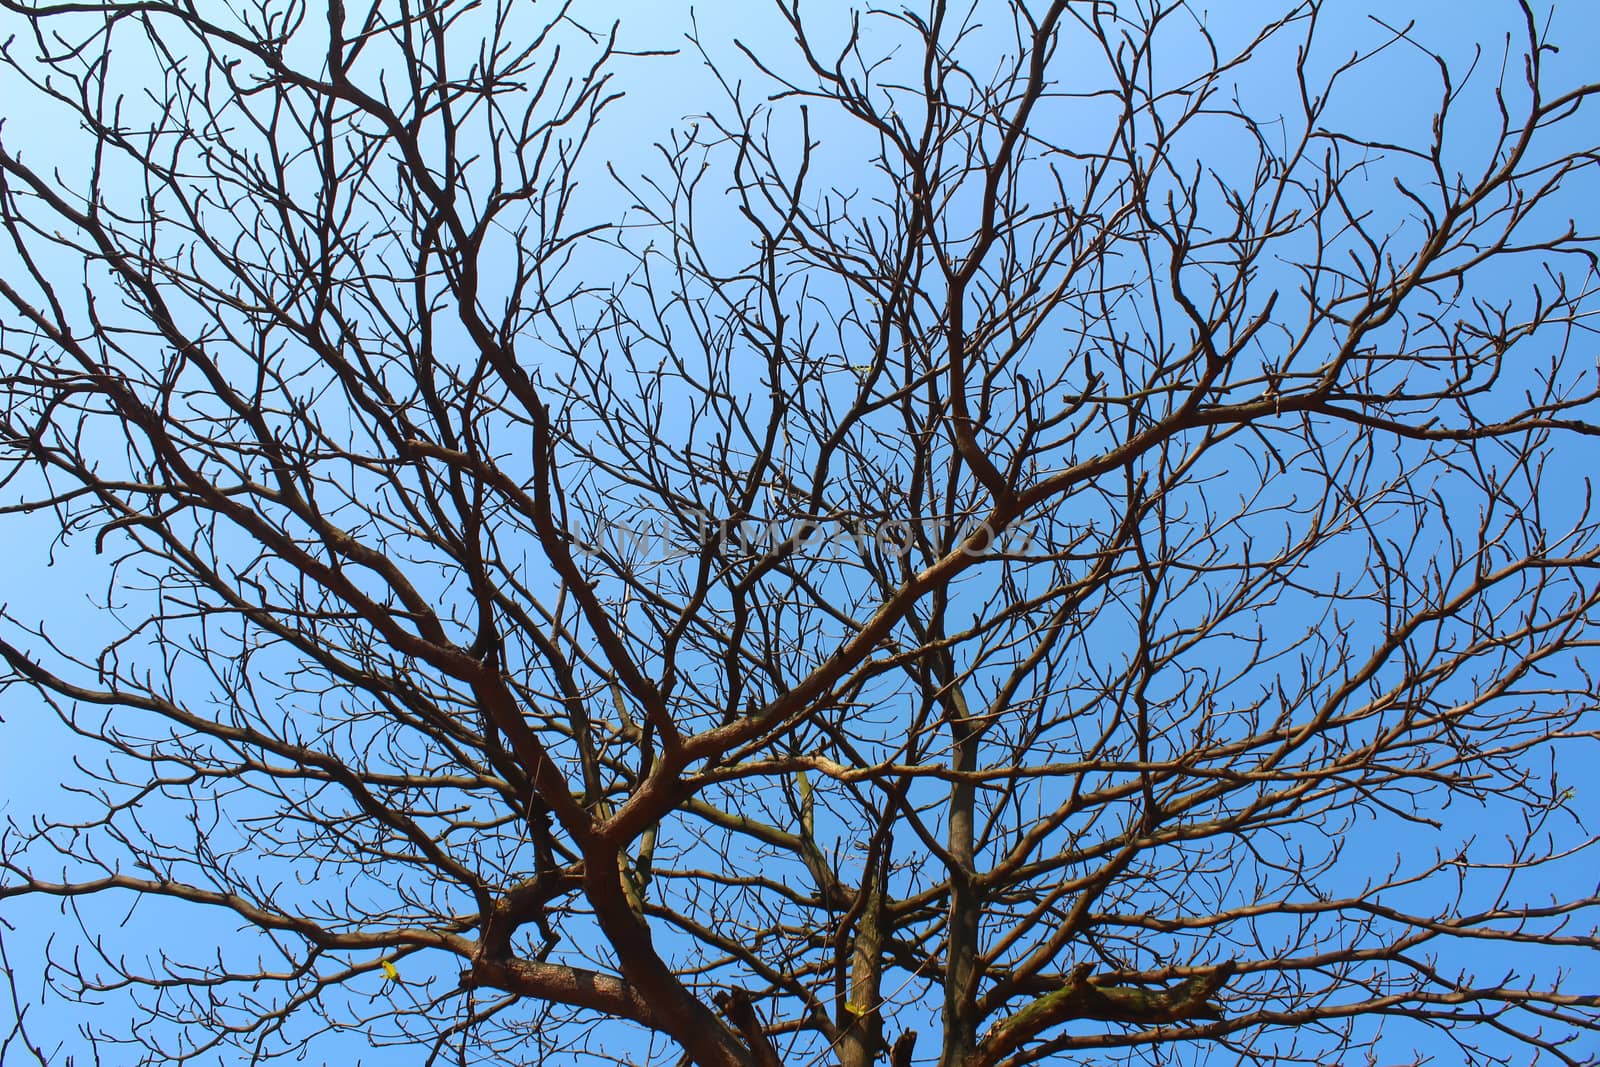 dried branches and sky  by dinhngochung